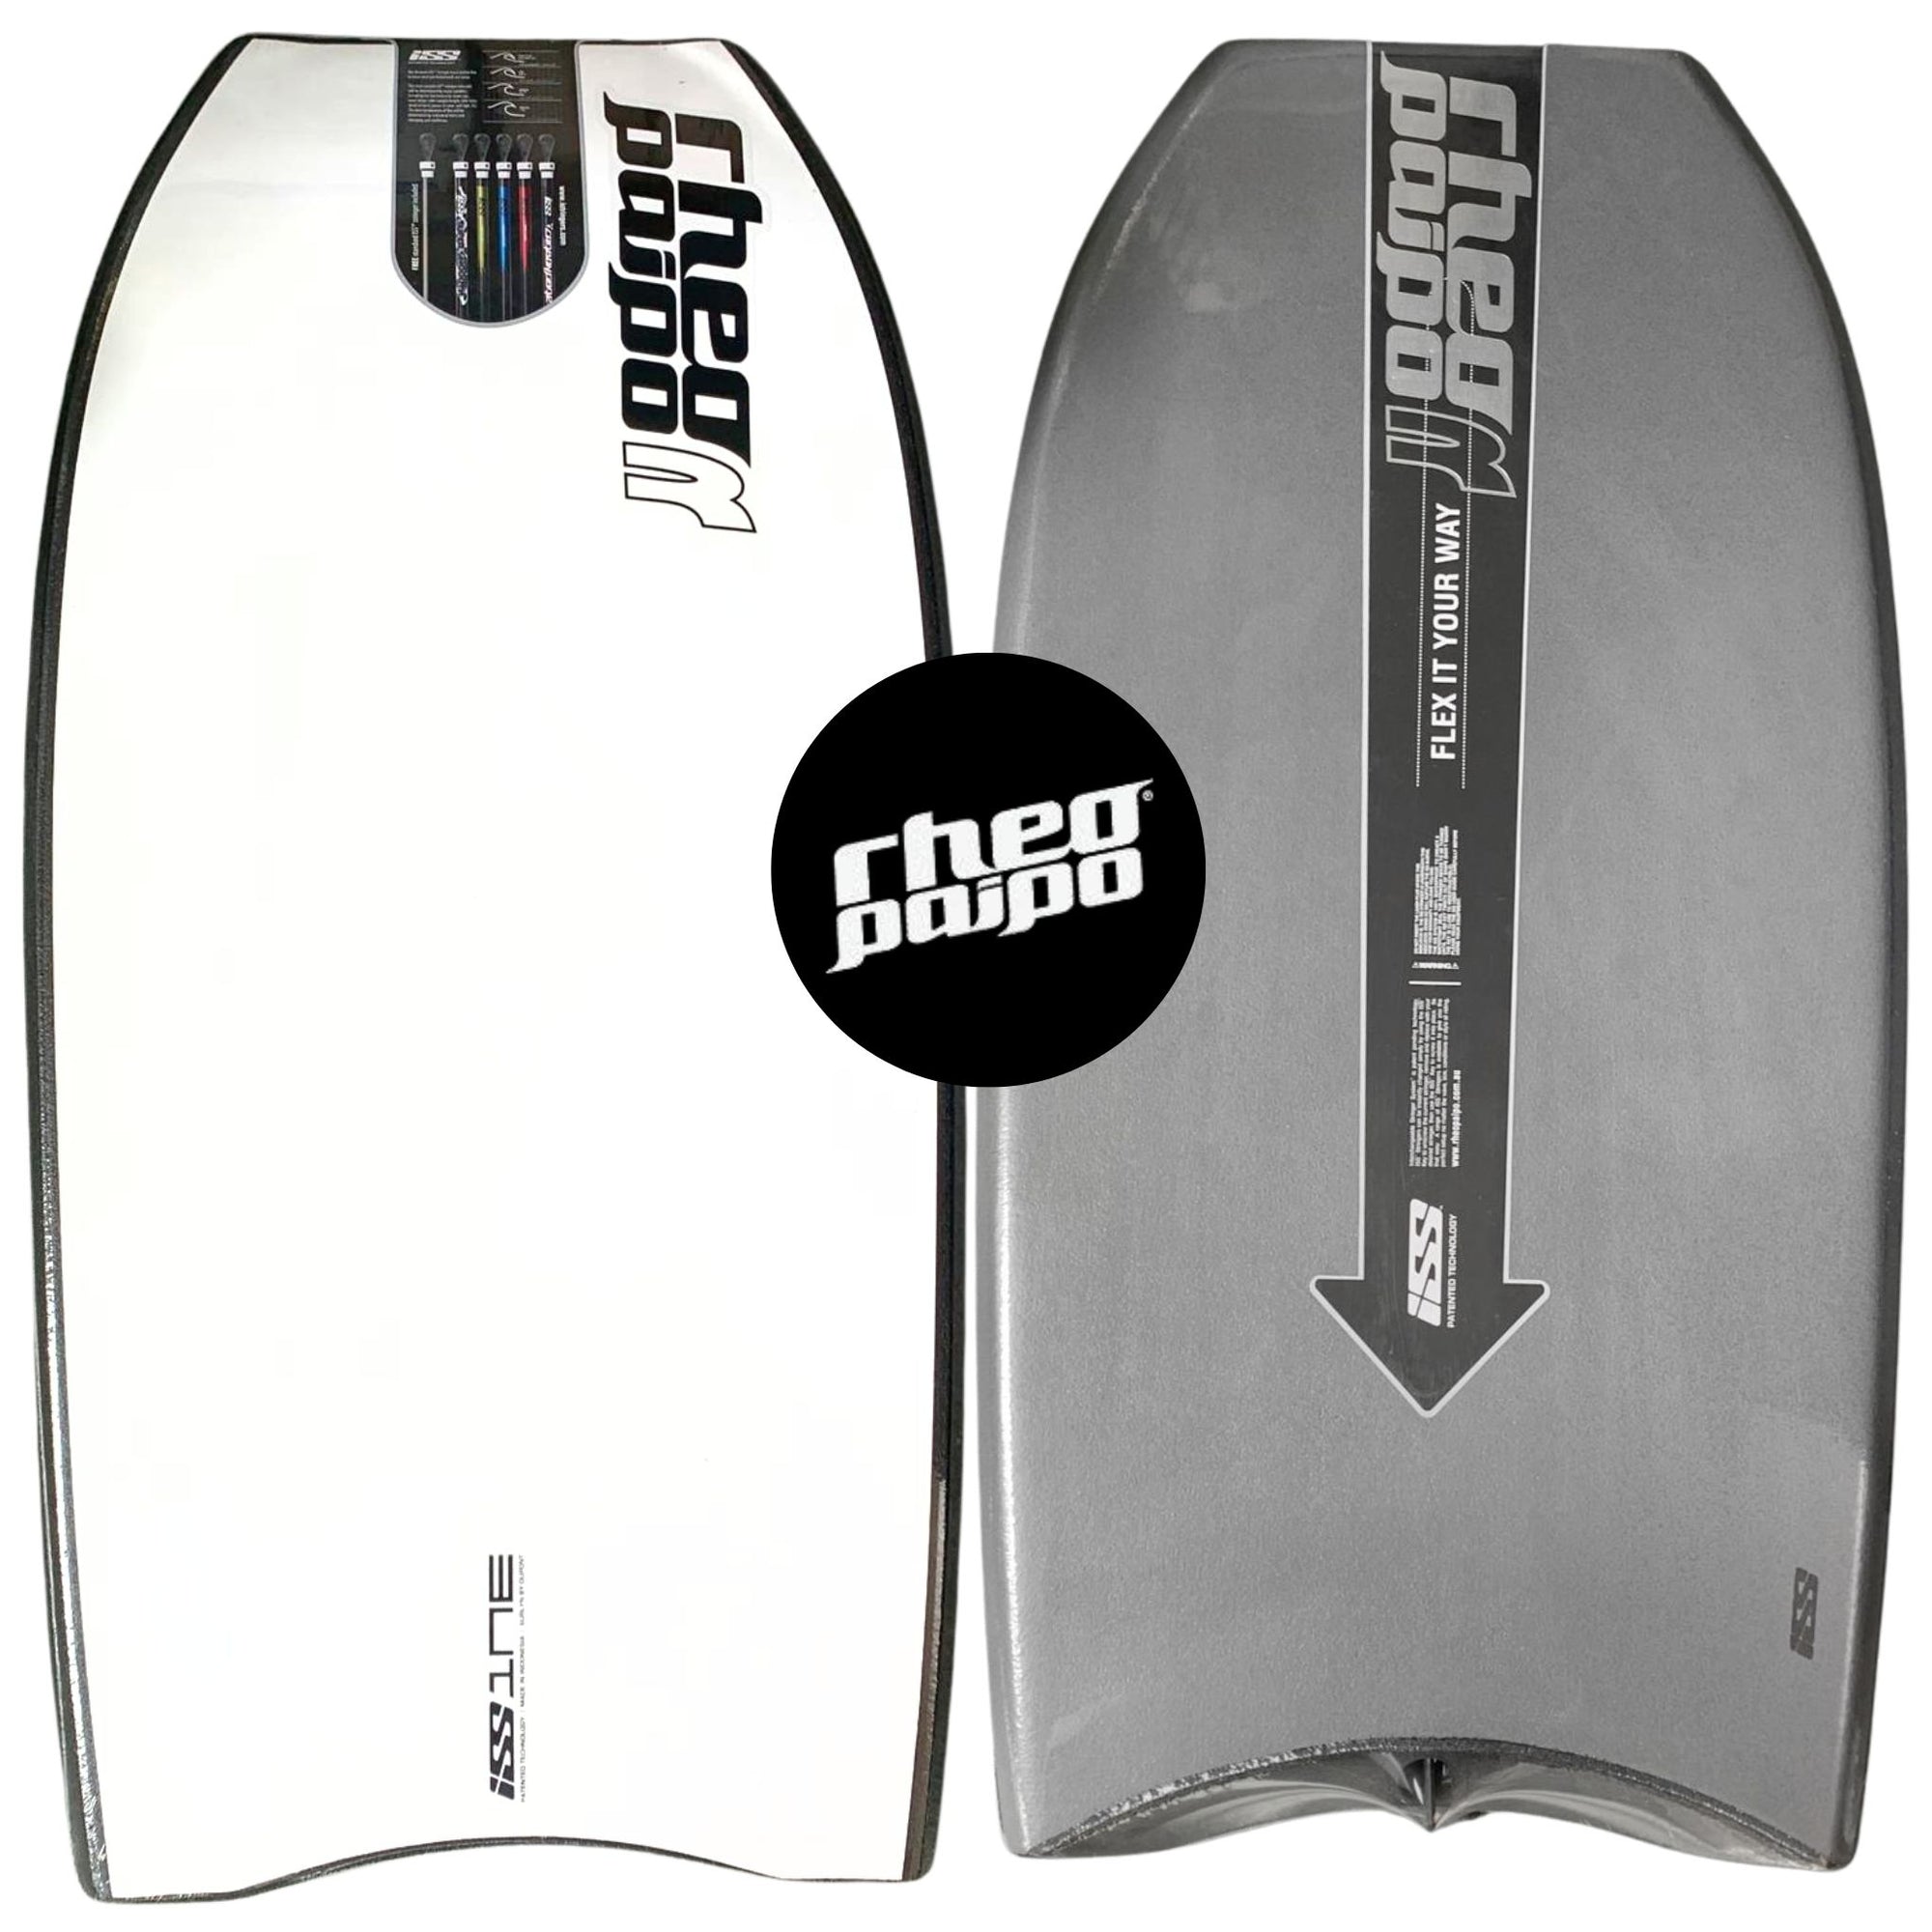 RHEOPAIPO ISS BODY BOARD | PP KINETIC CORE | 1NE | 40" - South East Clearance Centre